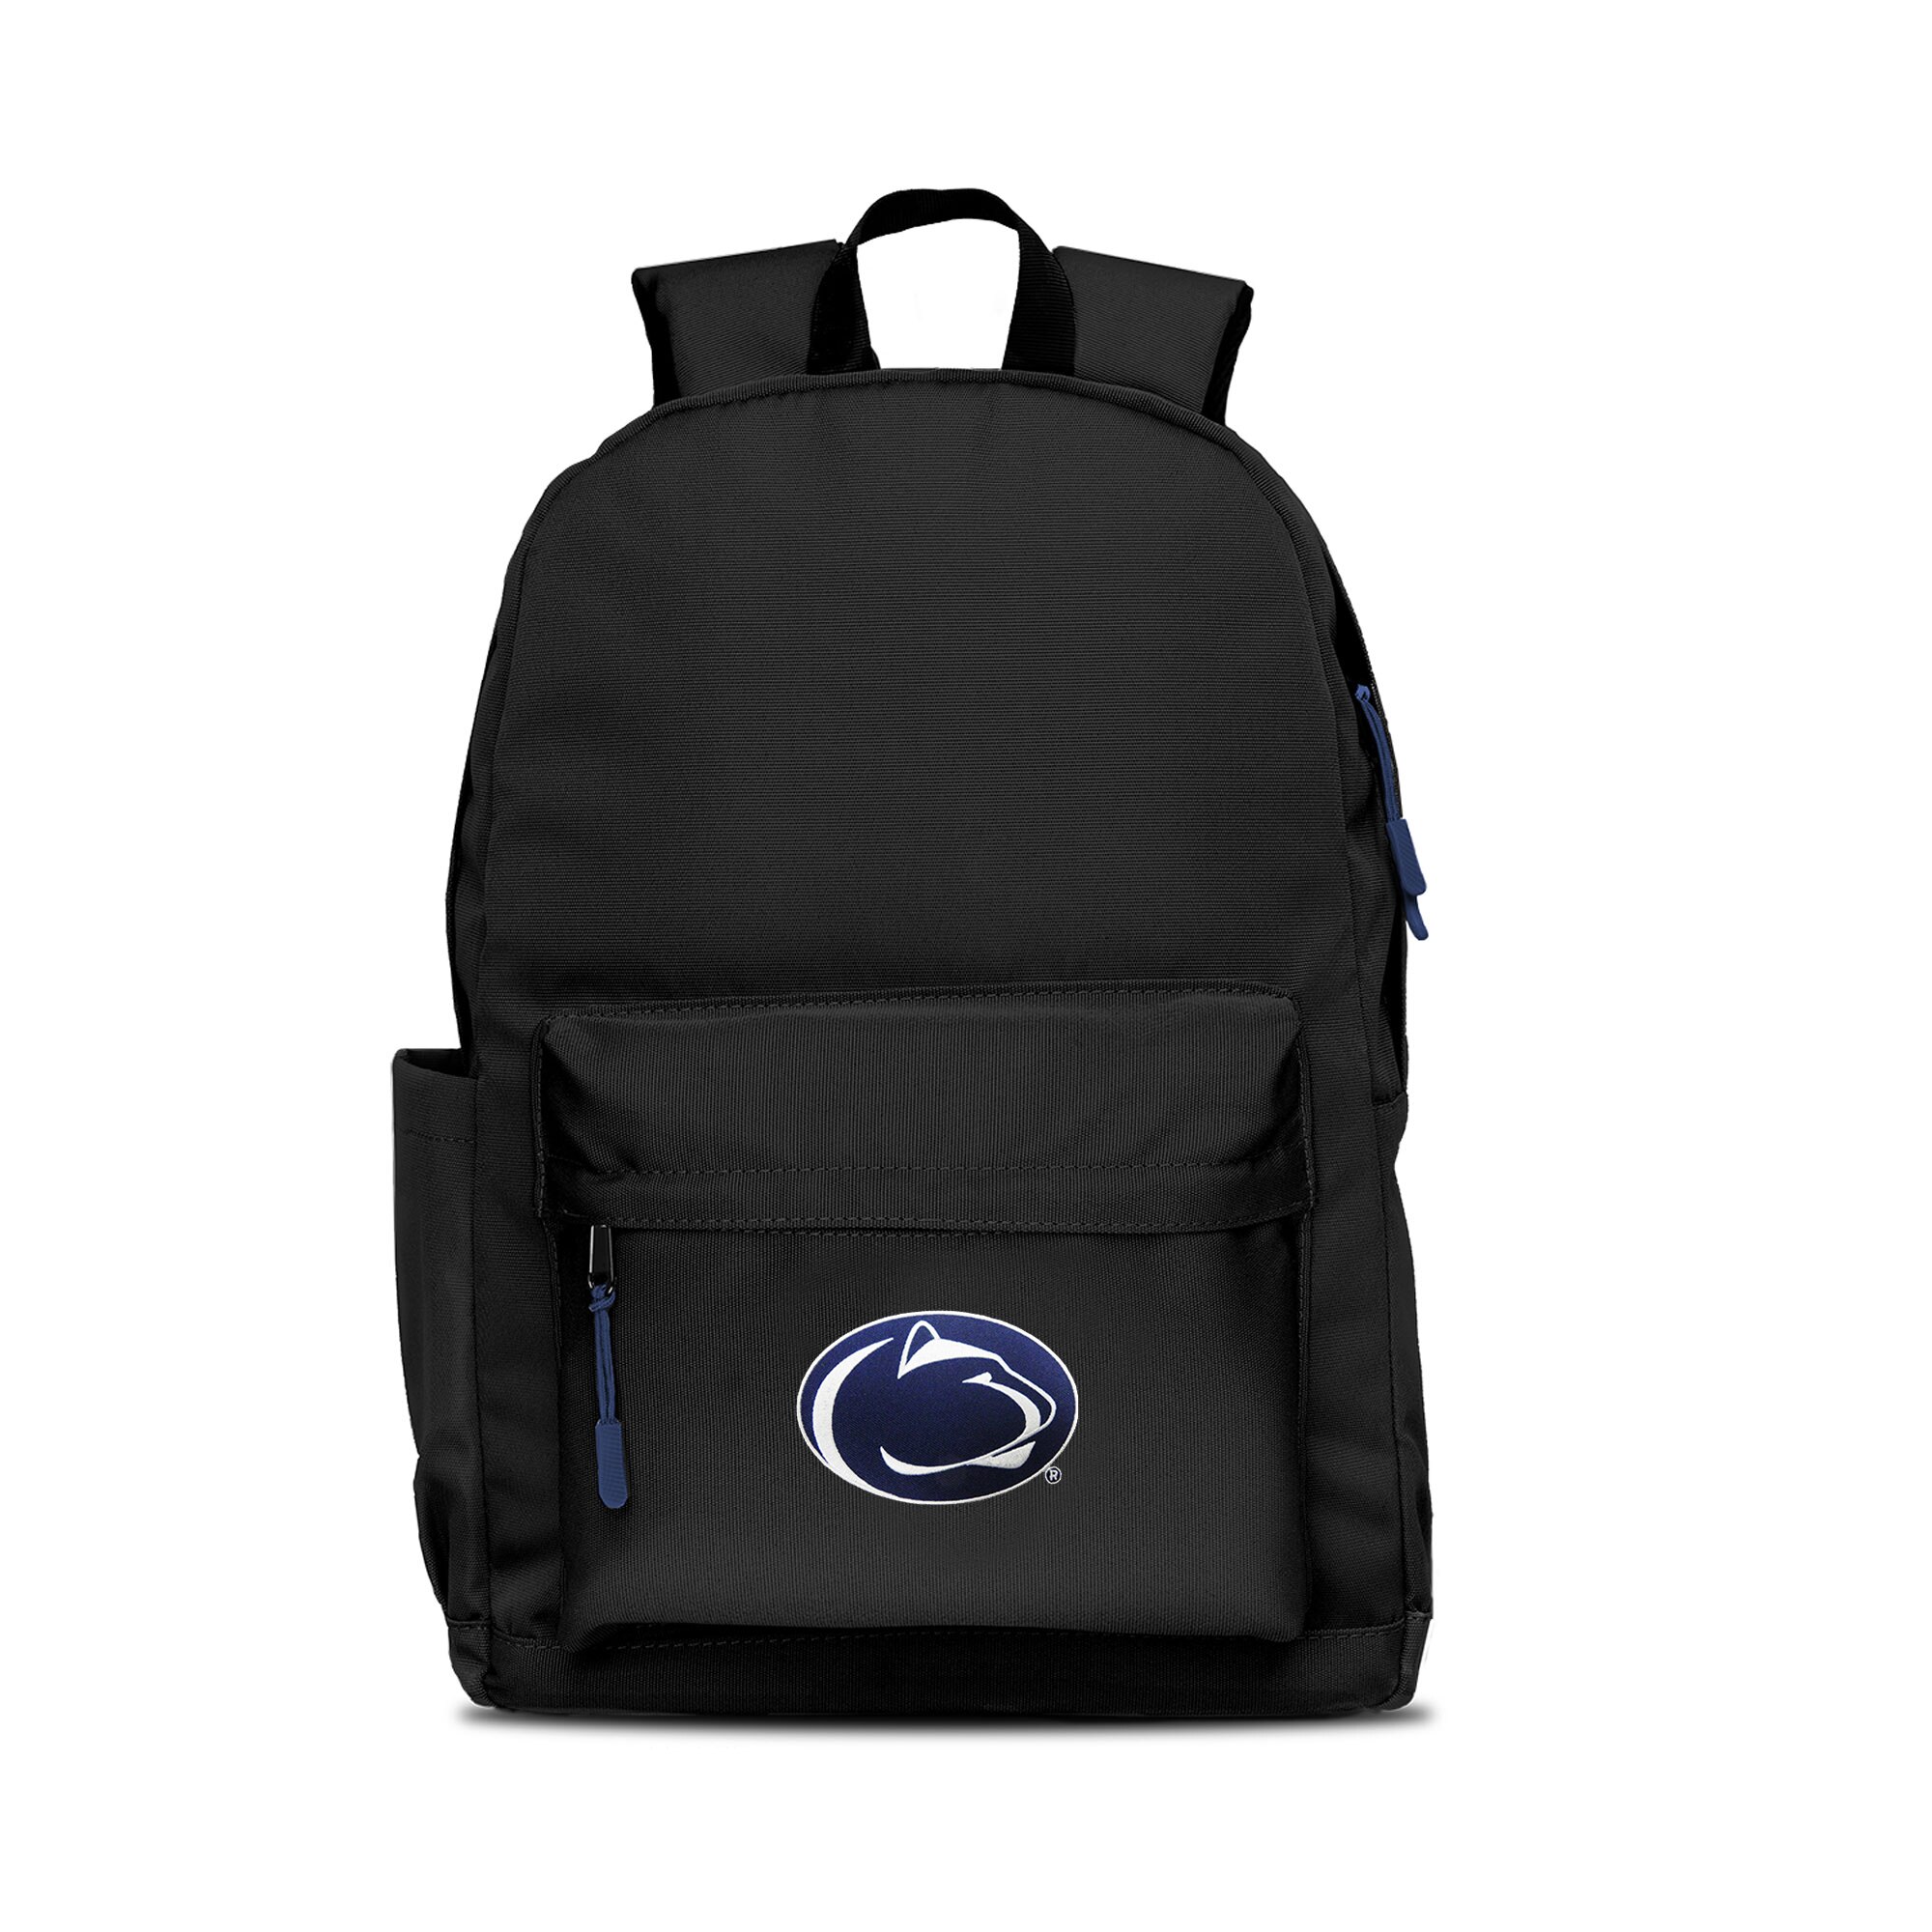 Penn State Nittany Lions L716 Campus Backpack Backpacks and Bags